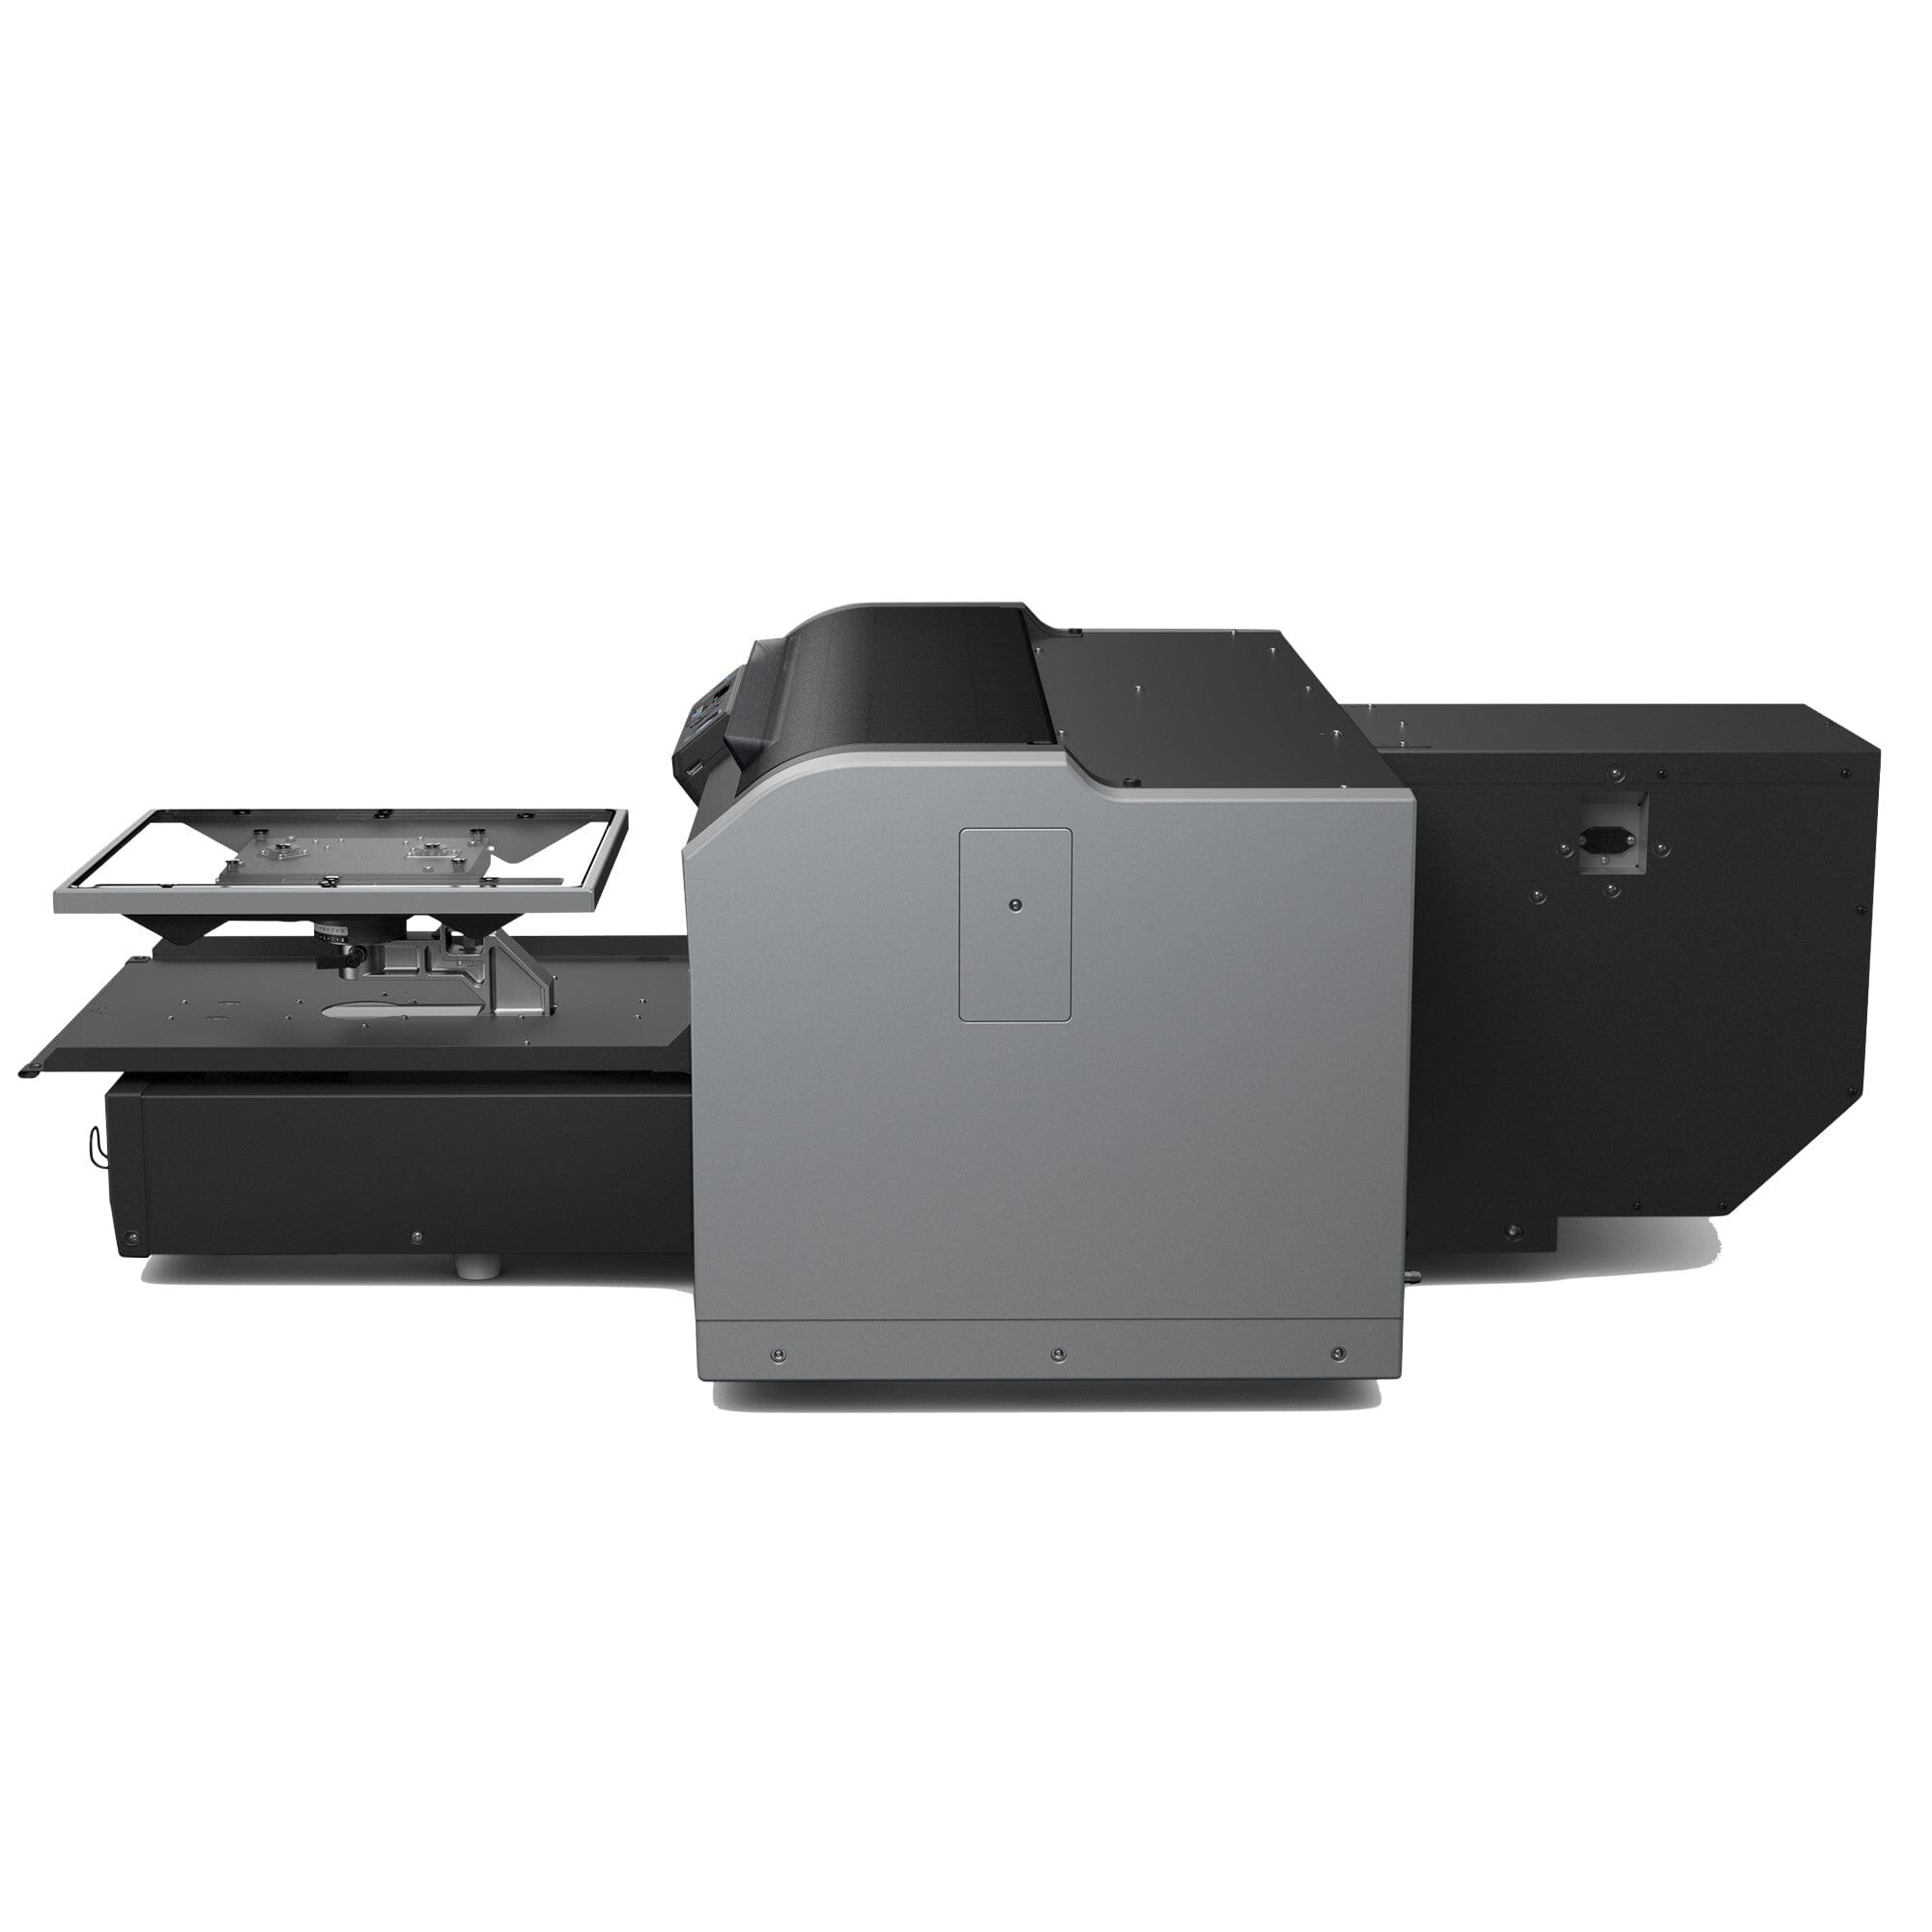 Epson F2270 DTG & DTF Combo Printer with Deluxe DTG Pretreatment Bundle